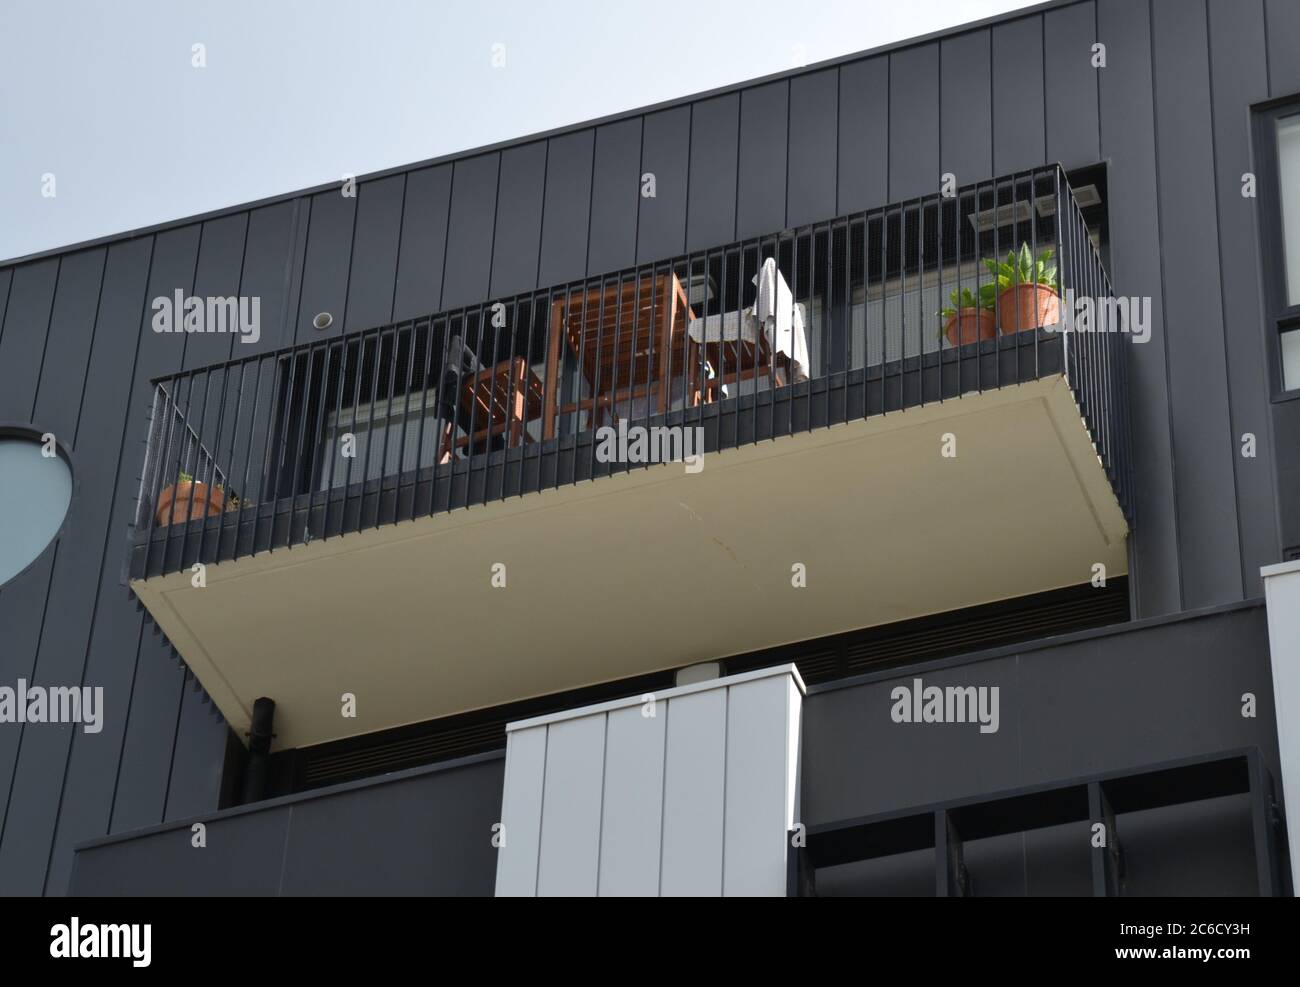 Outside balcony or deck from underside on a modern steel cladding apartment building in inner city Melbourne, Victoria Stock Photo